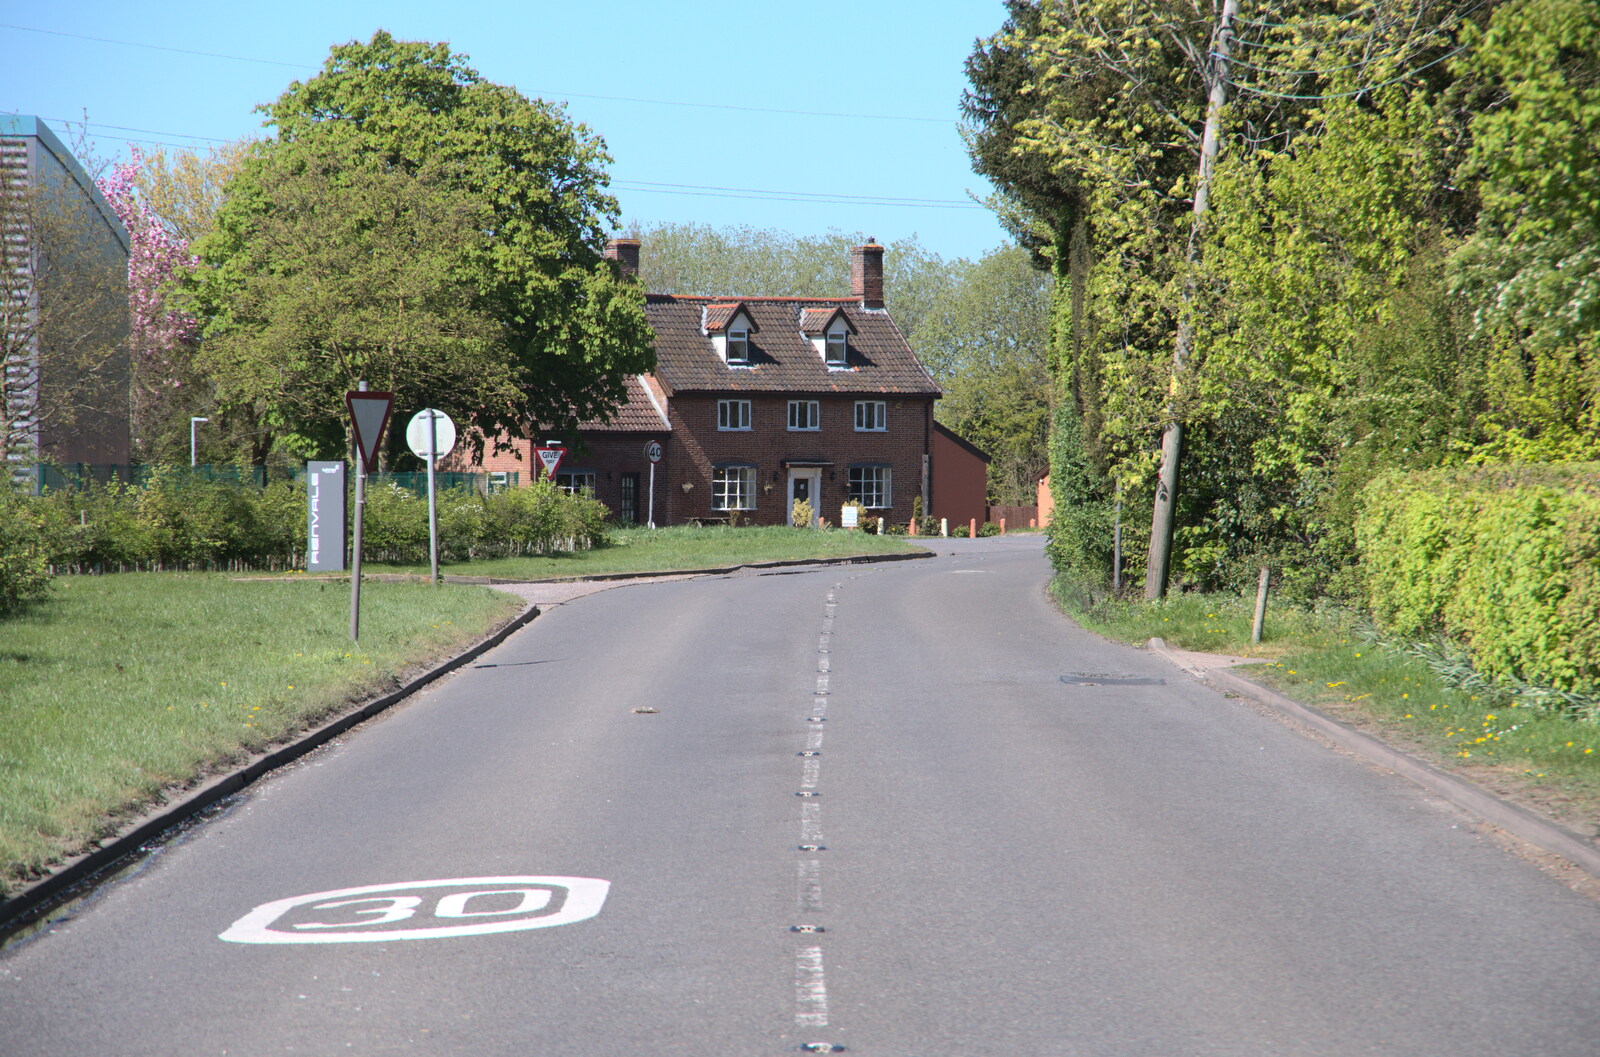 The Old Swan, taken from the middle of the road from The Lockdown Desertion of Diss, and a Bike Ride up the Avenue, Brome - 19th April 2020